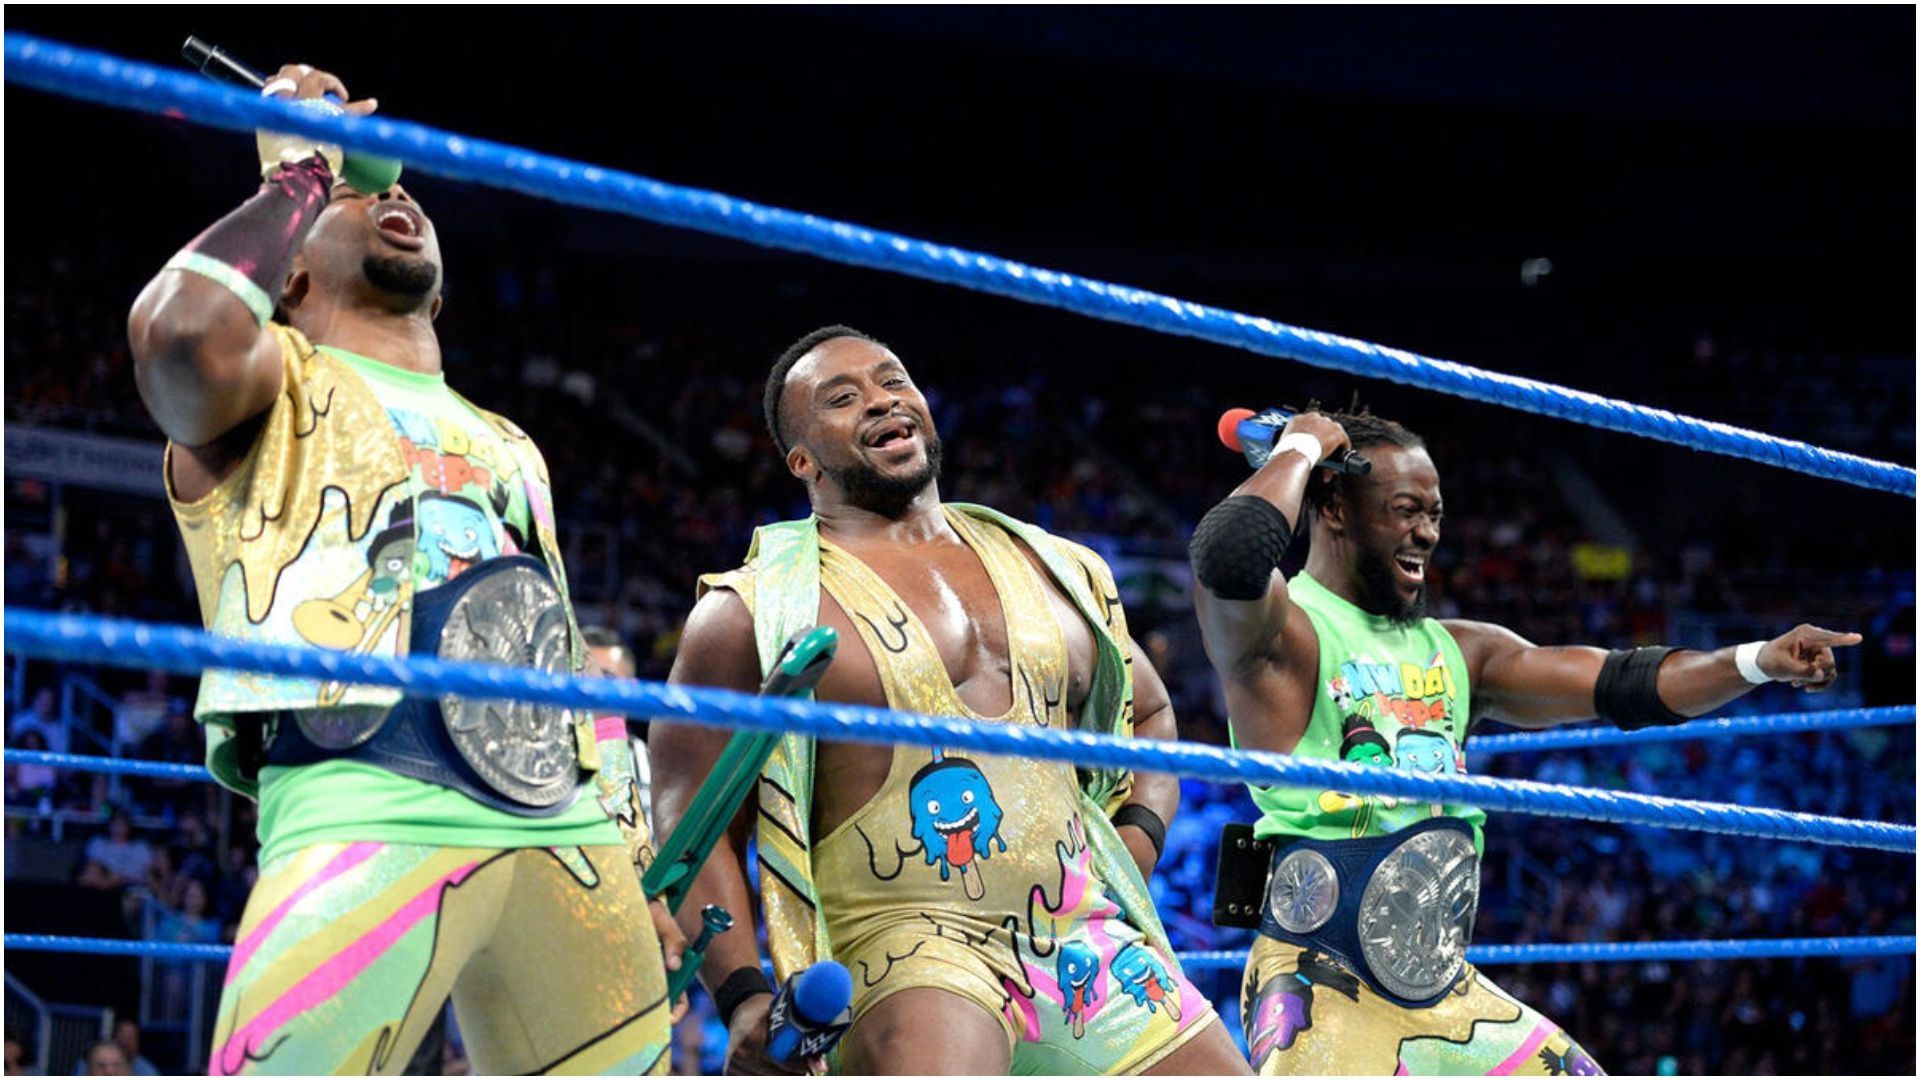 The New Day faction was selected by WWE RAW brand during the 2024 Draft.